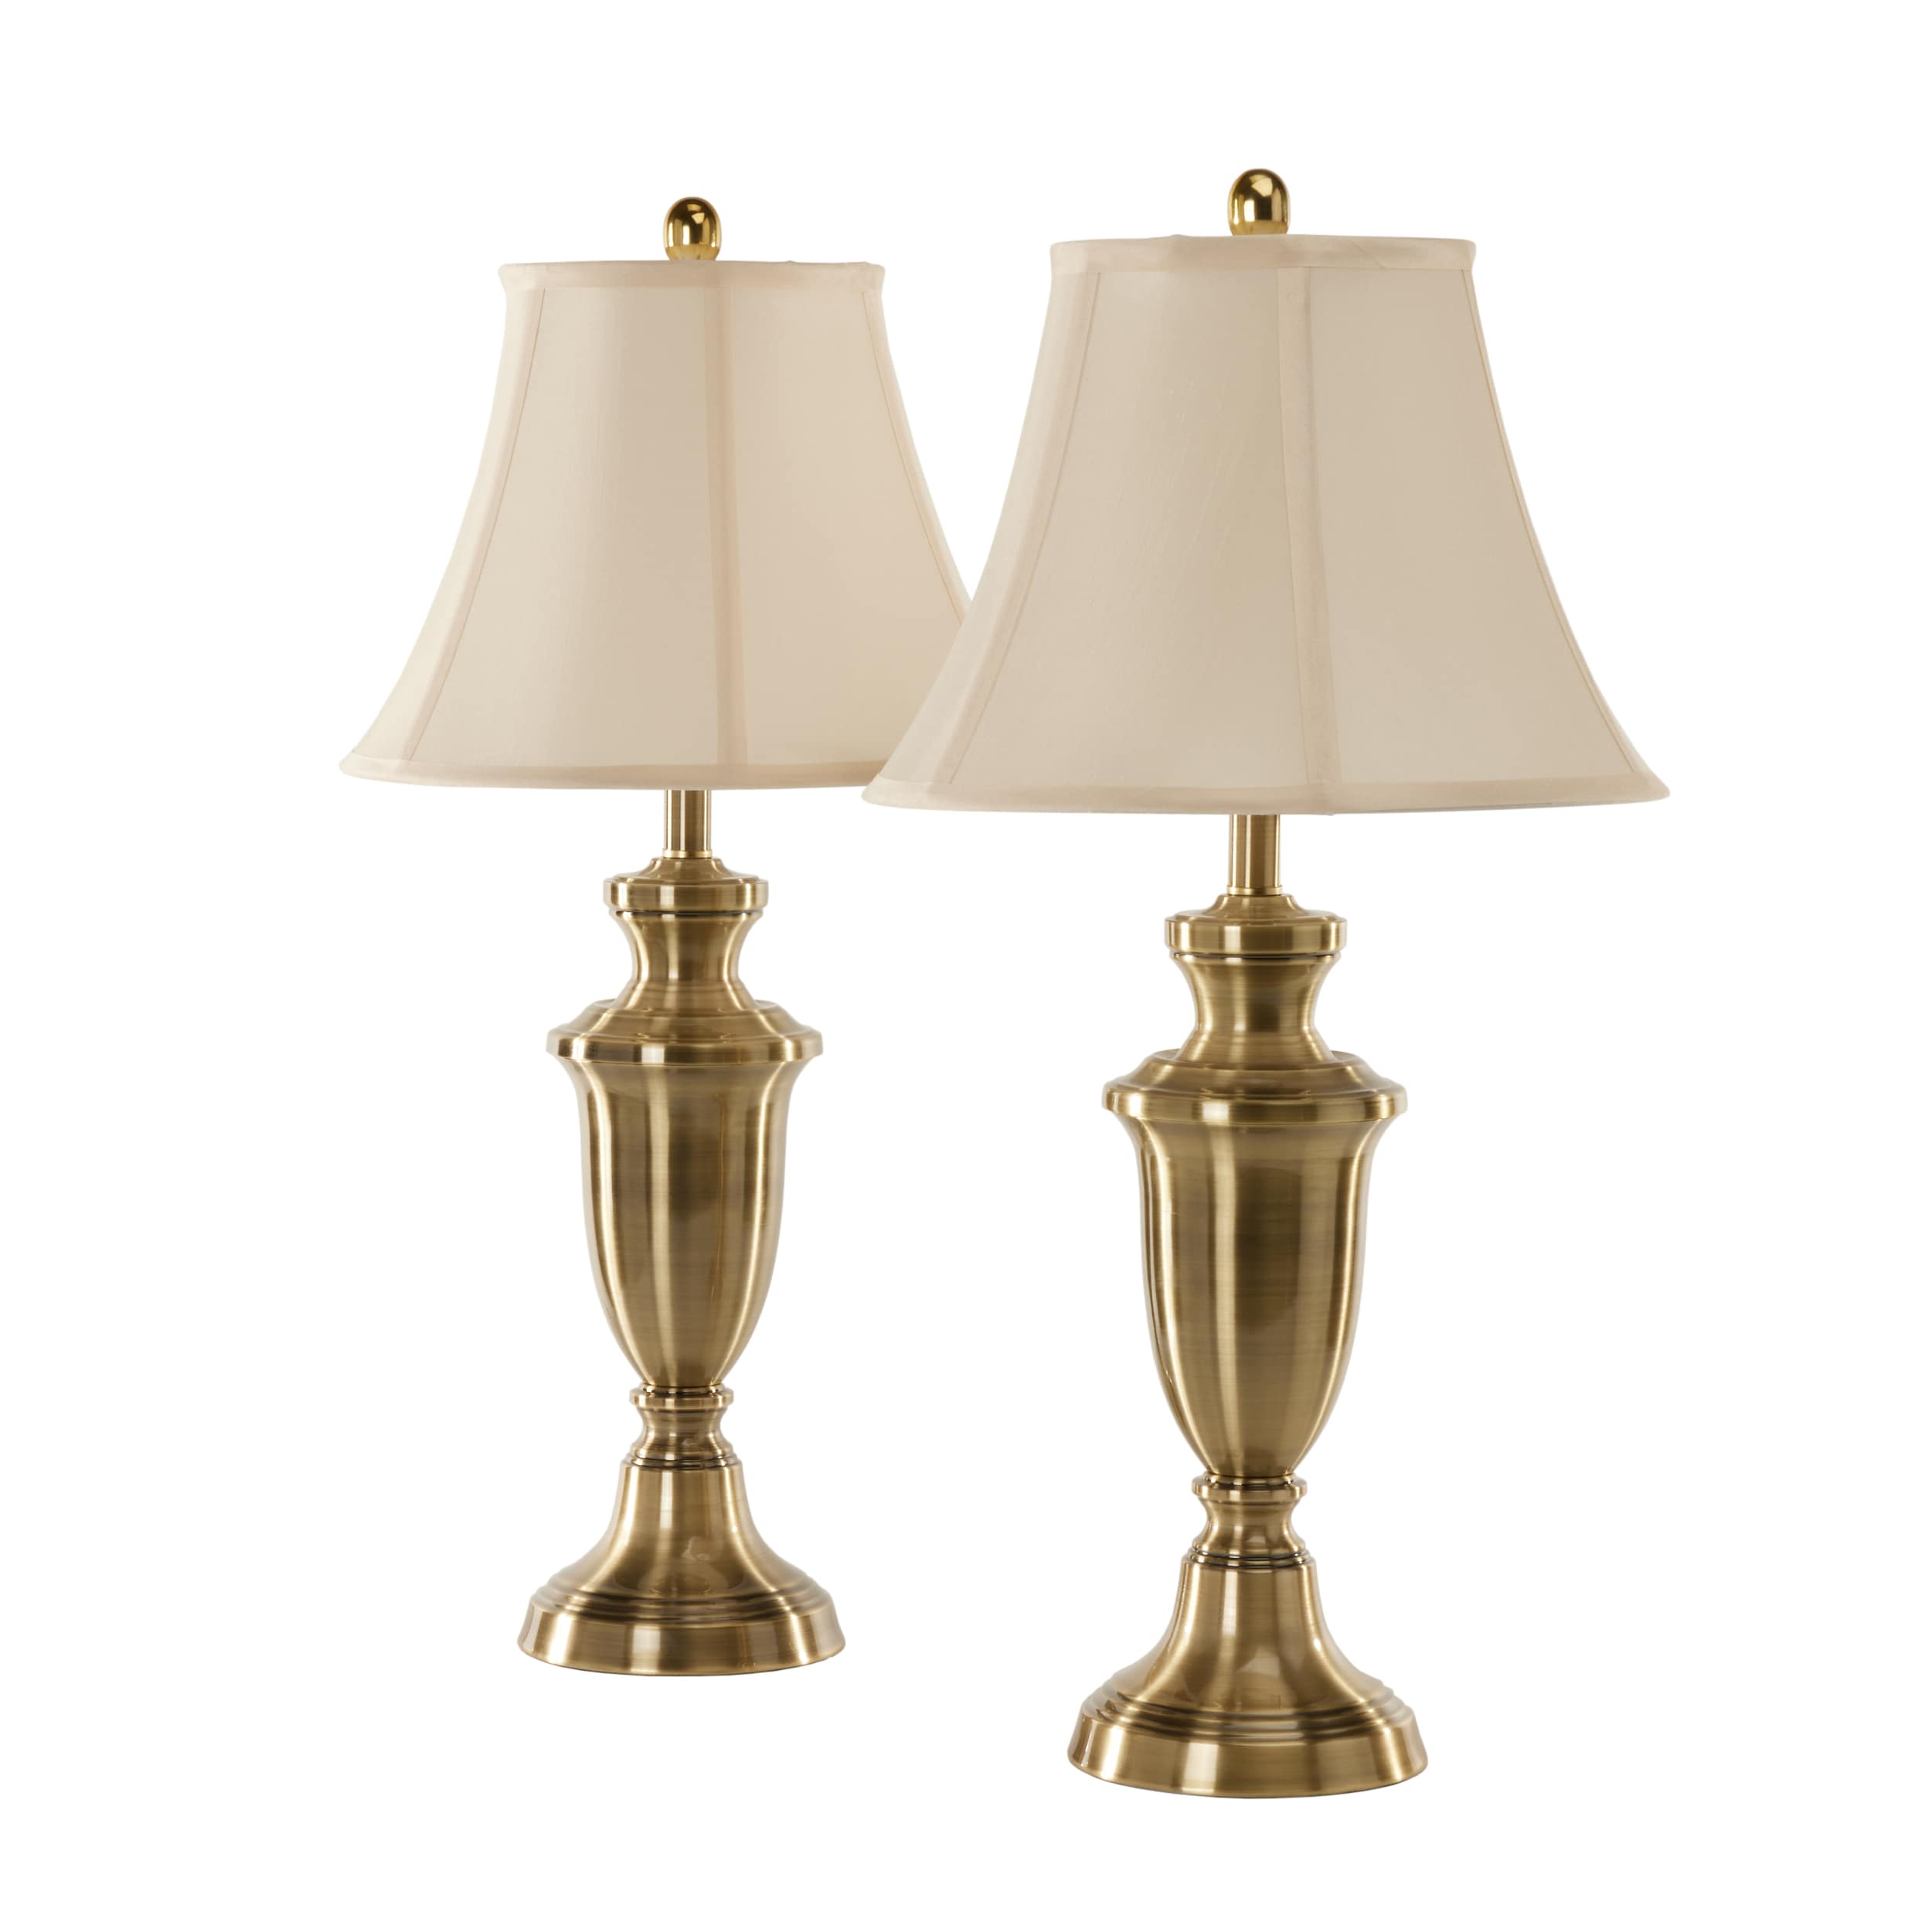 Sina - 3 Stage Touch Table Lamp - Brushed Brass and Vintage White Shad -  Lightbox